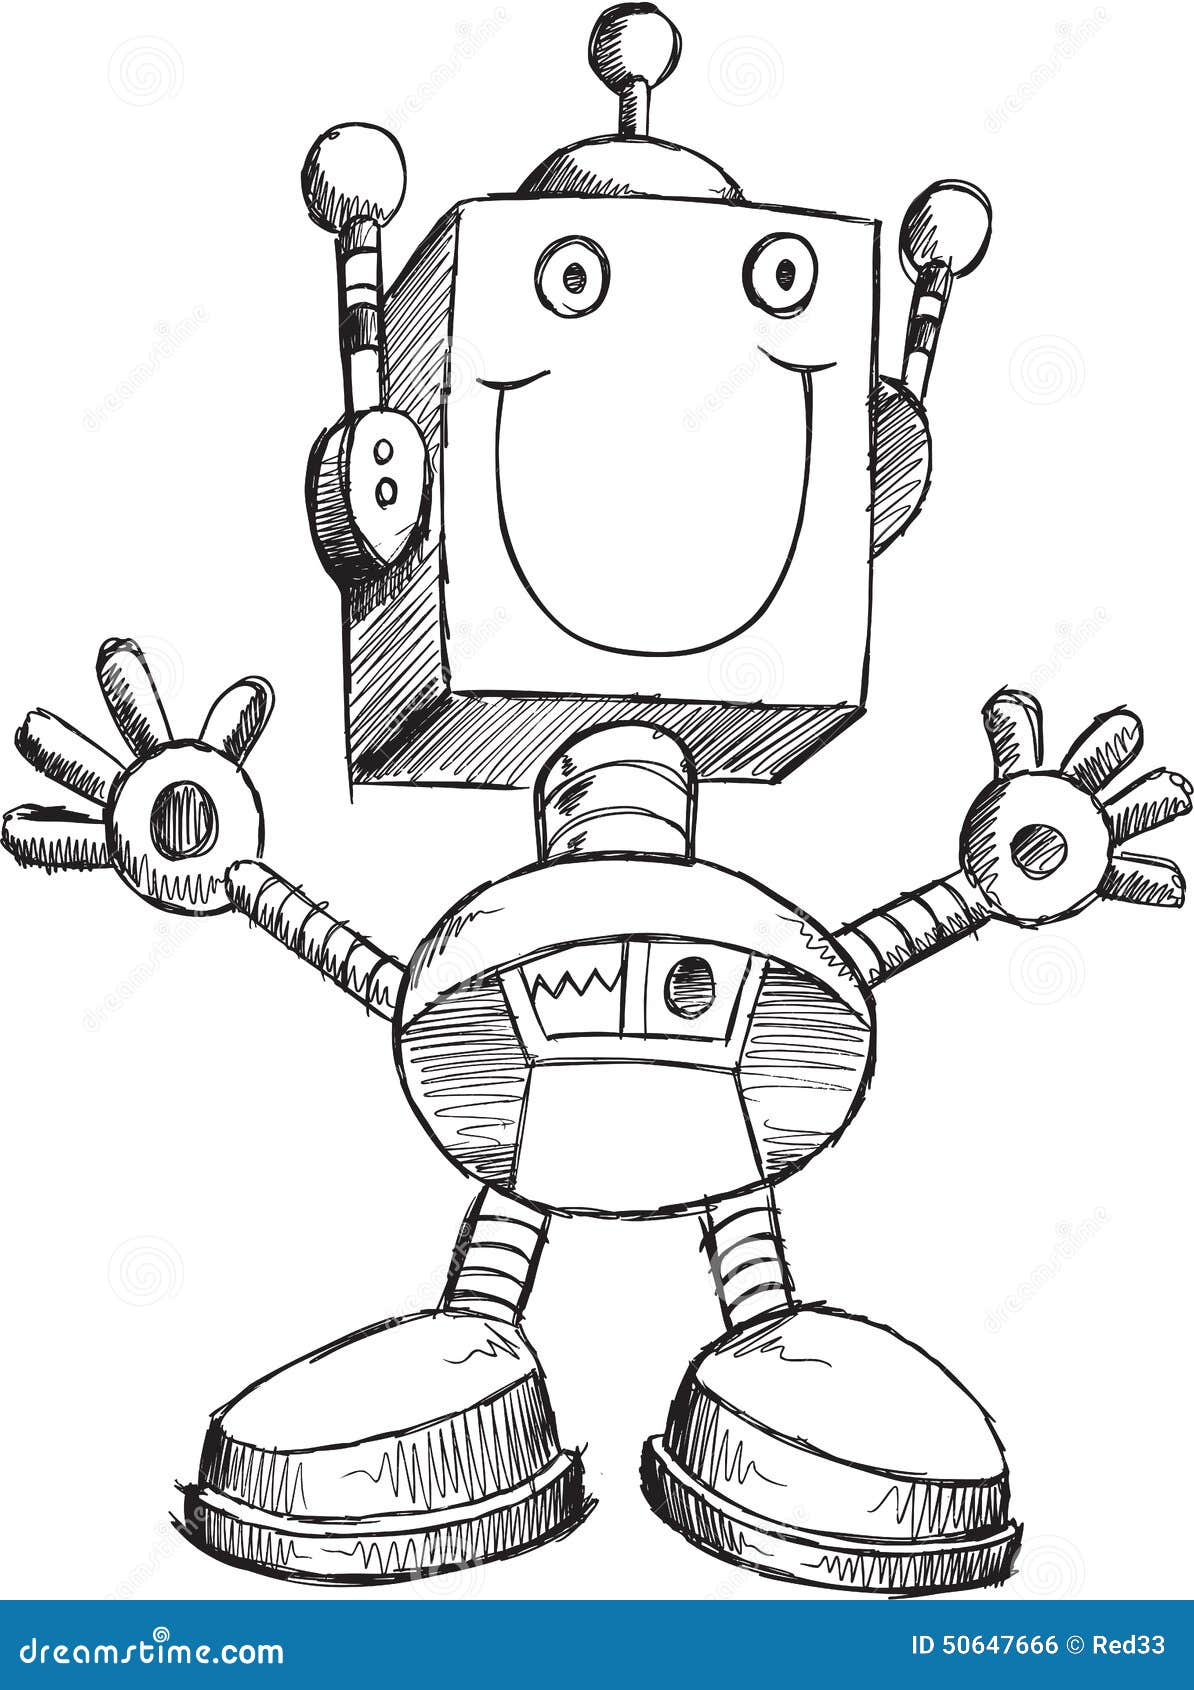 Doodle Robot Vector Stock Vector Illustration Of Technology 50647666